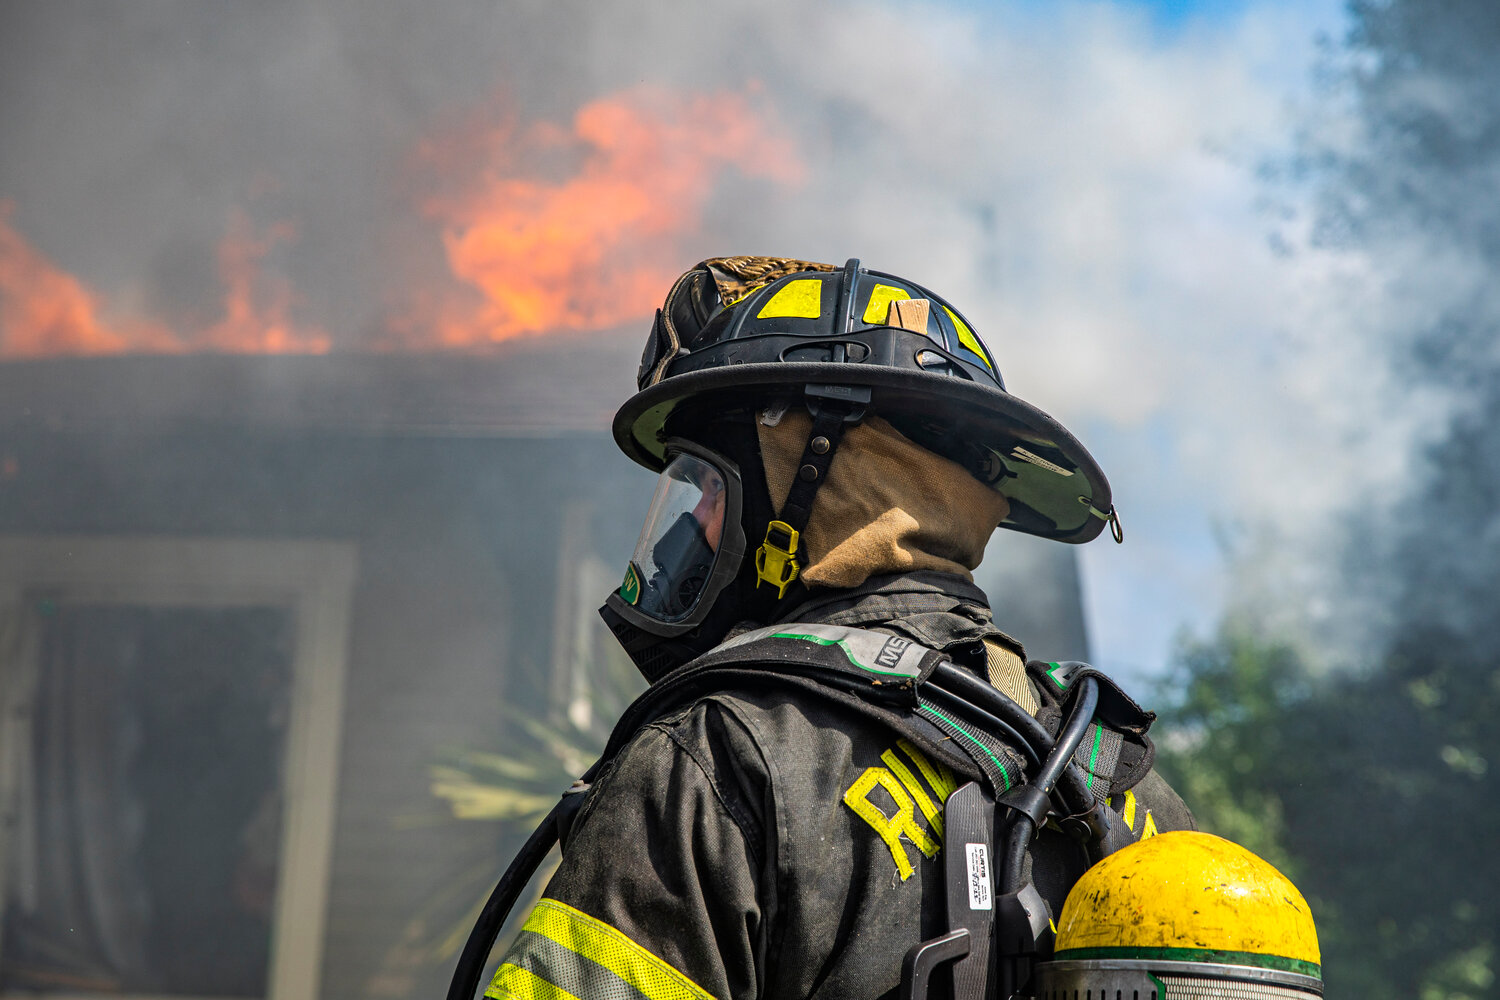 A Riverside firefighter looks on as smoke and flames consume a residence in the 800 block of Centralia College Blvd. on Wednesday, May 24.